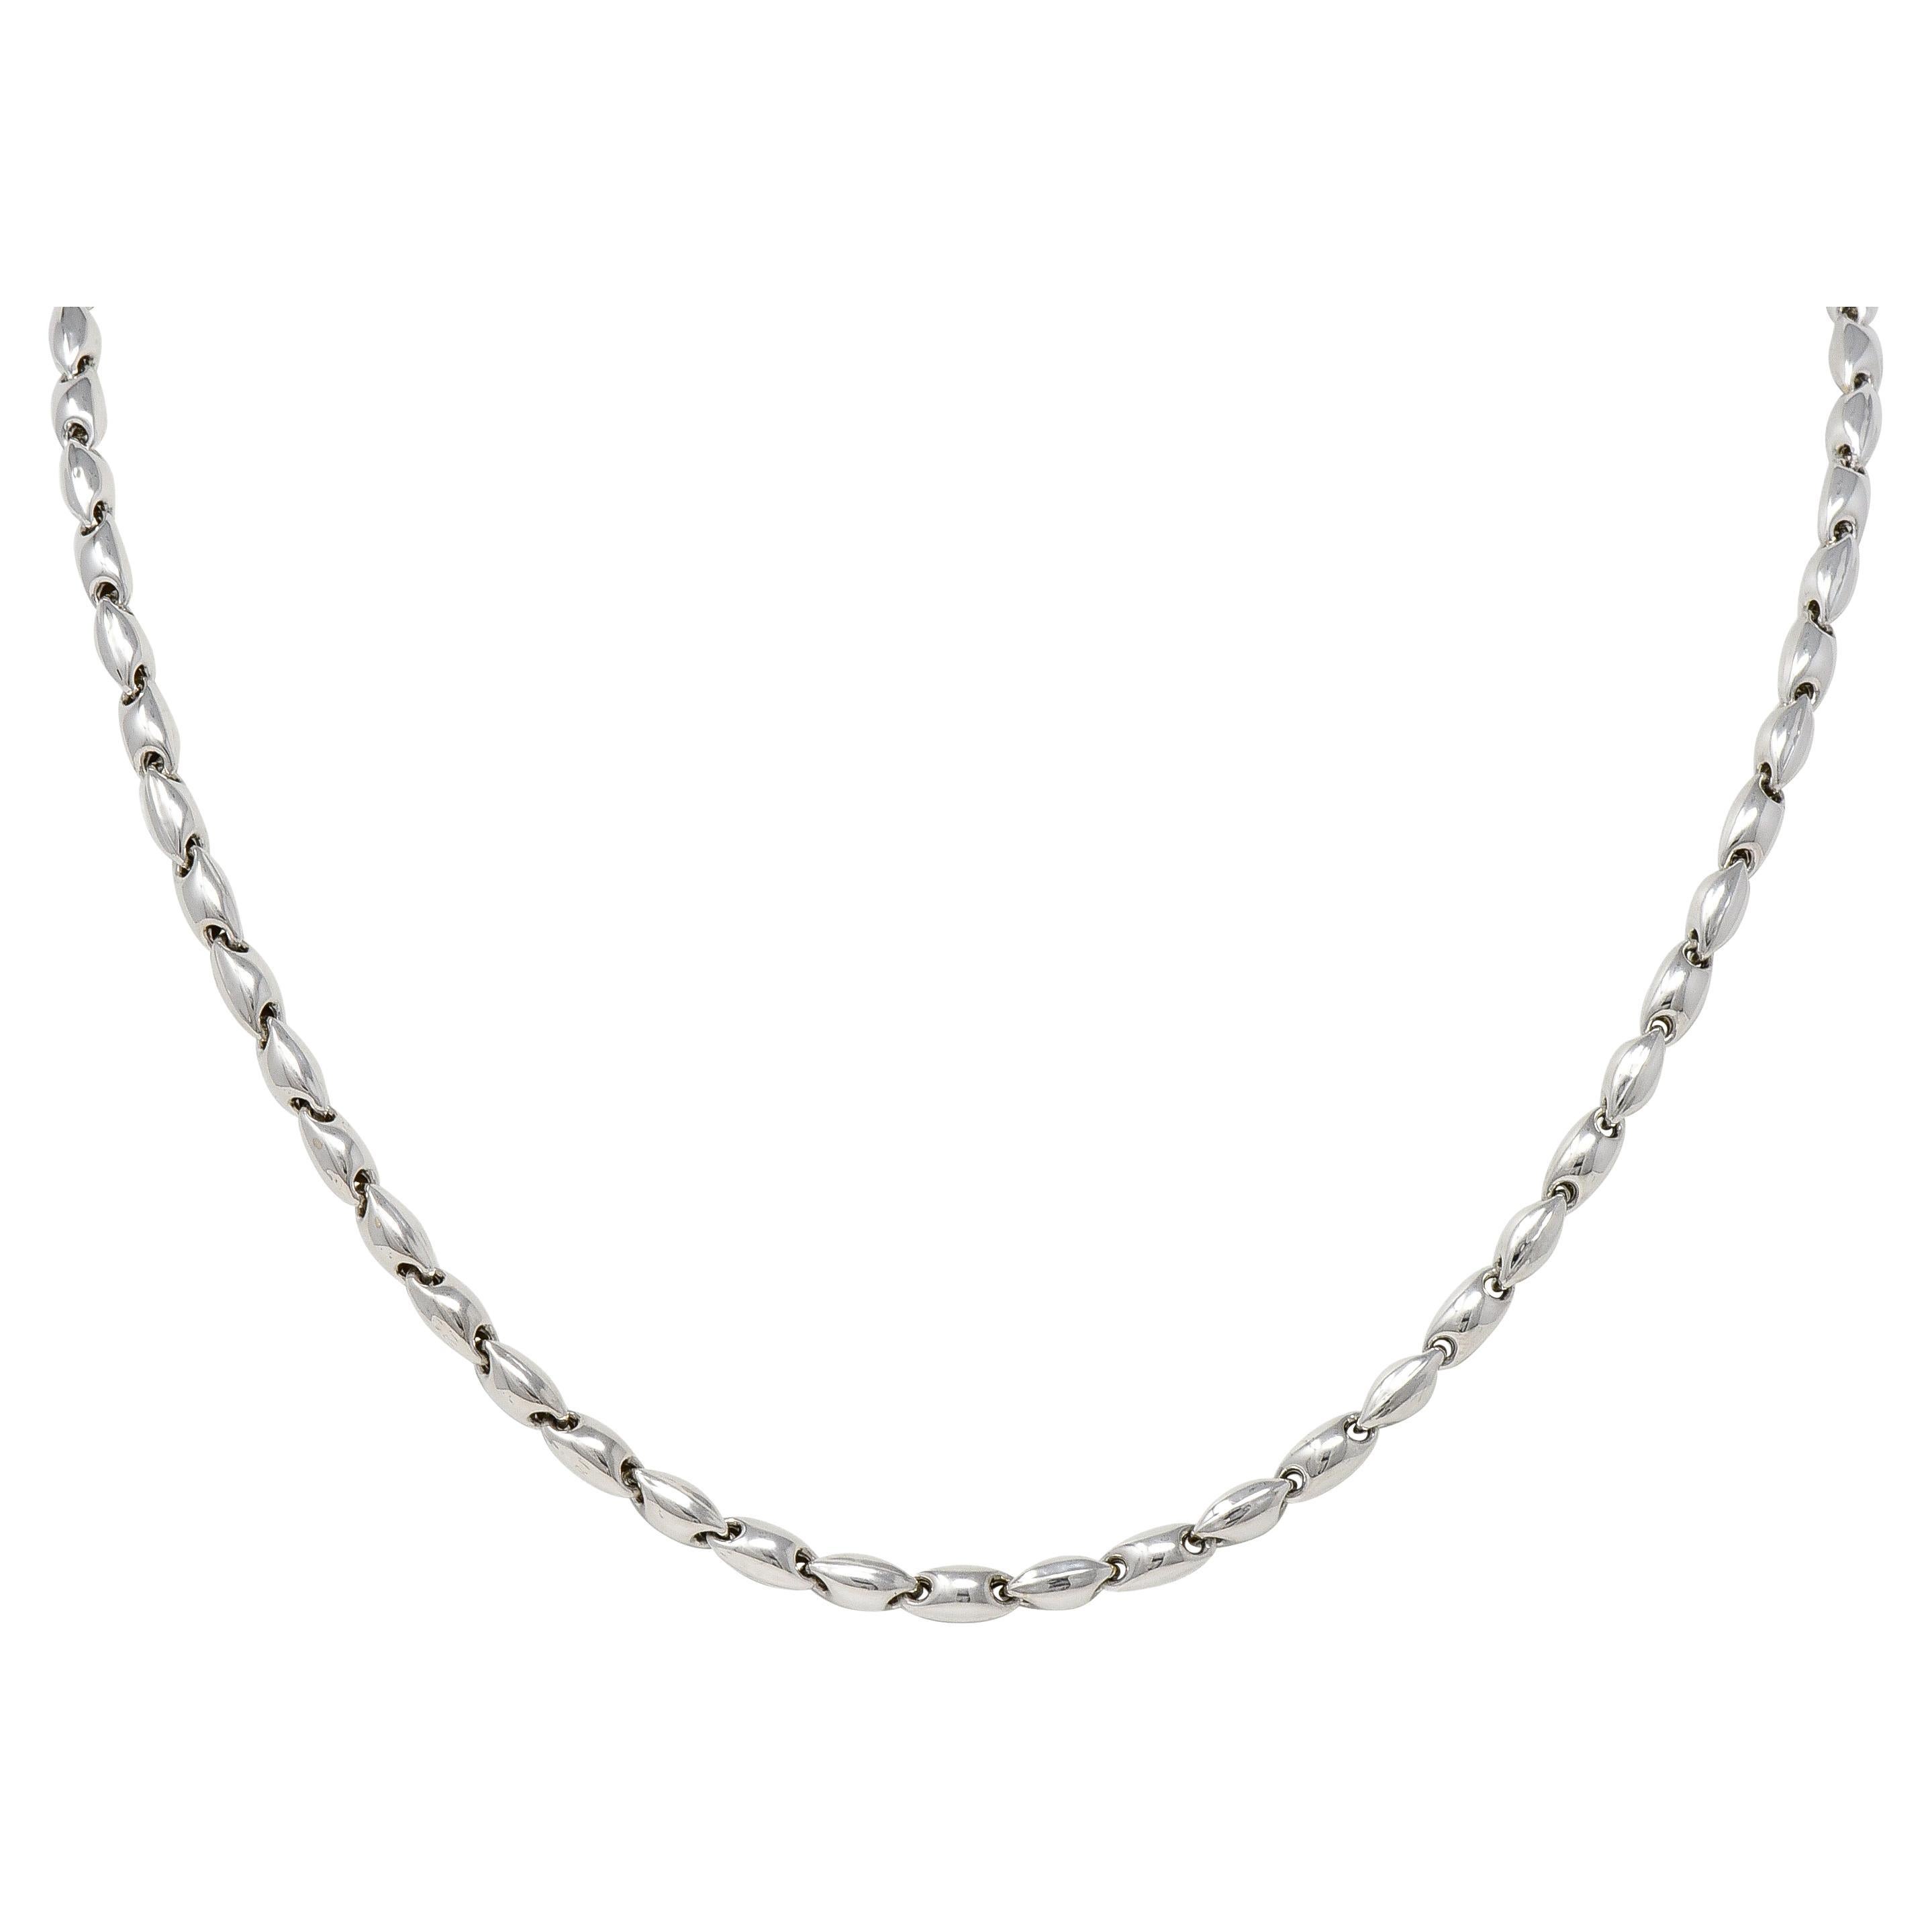 Chimento 18 Karat White Gold Puffed Mariner Link Vintage Chain Necklace